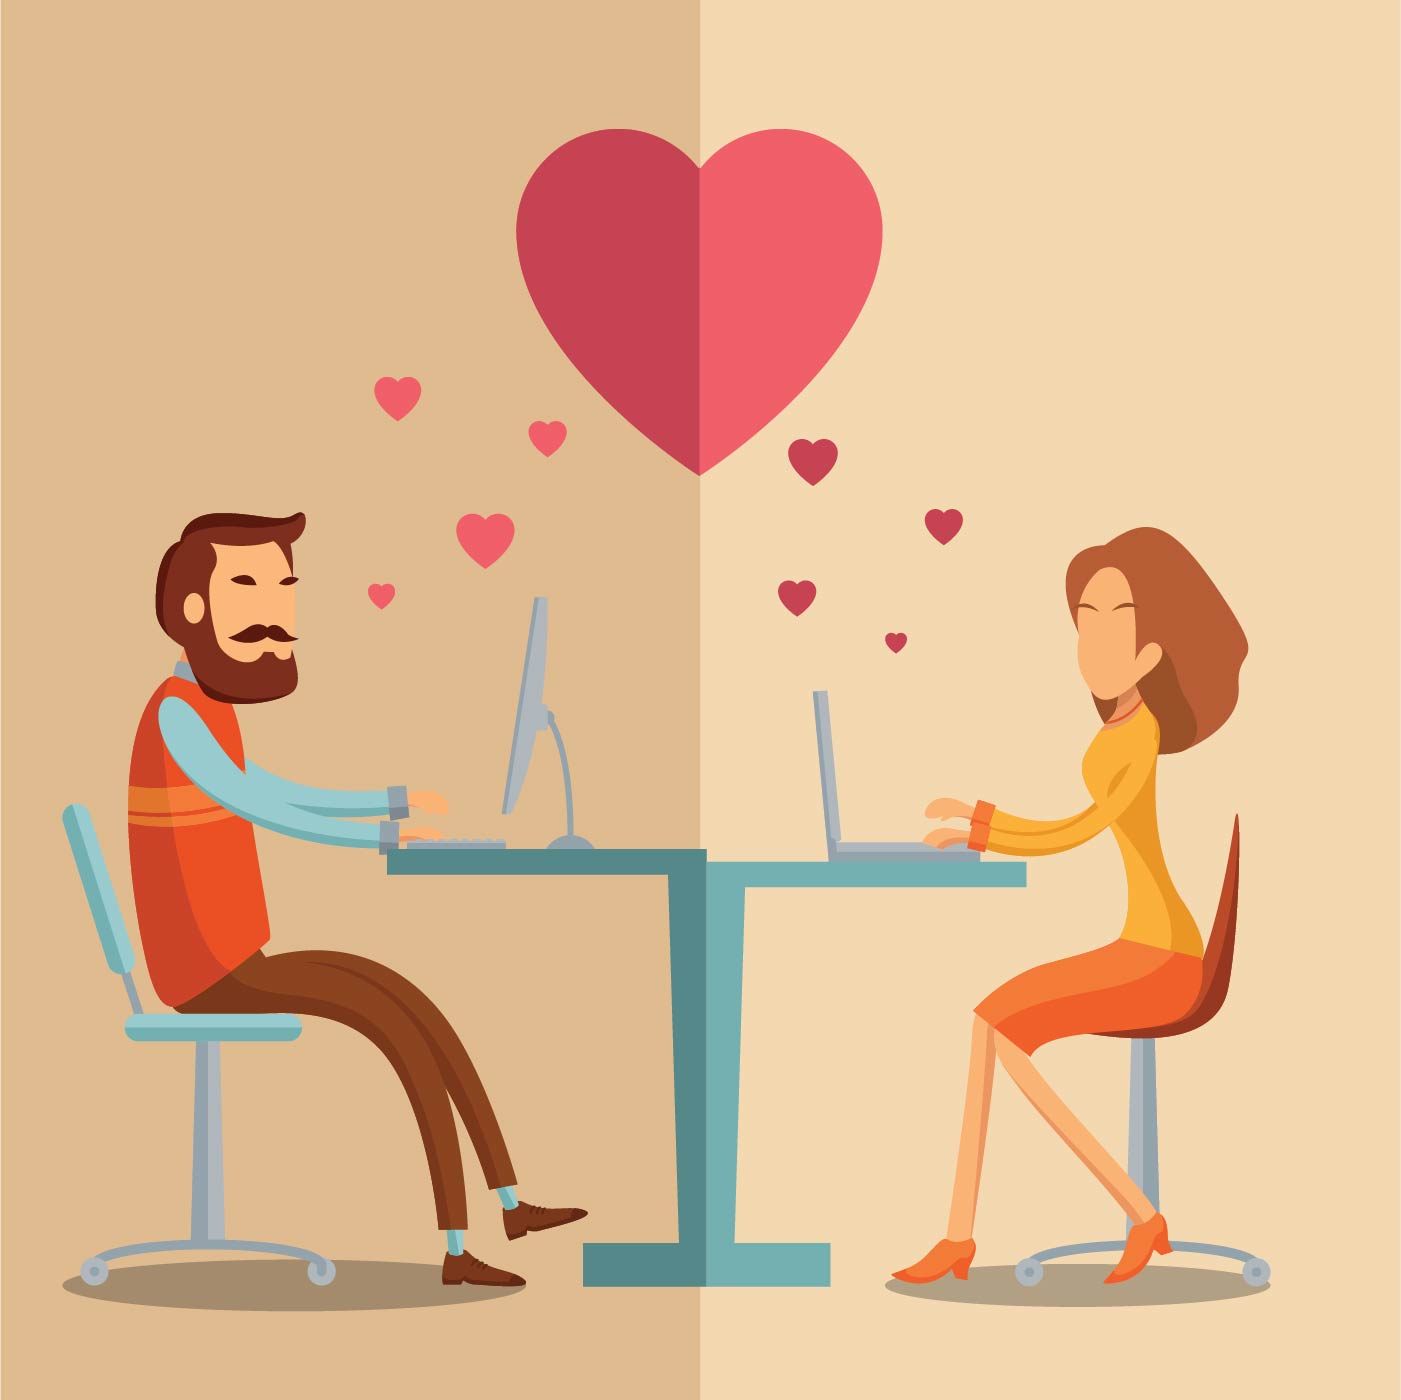 Ways in which online dating has commercialized human relations